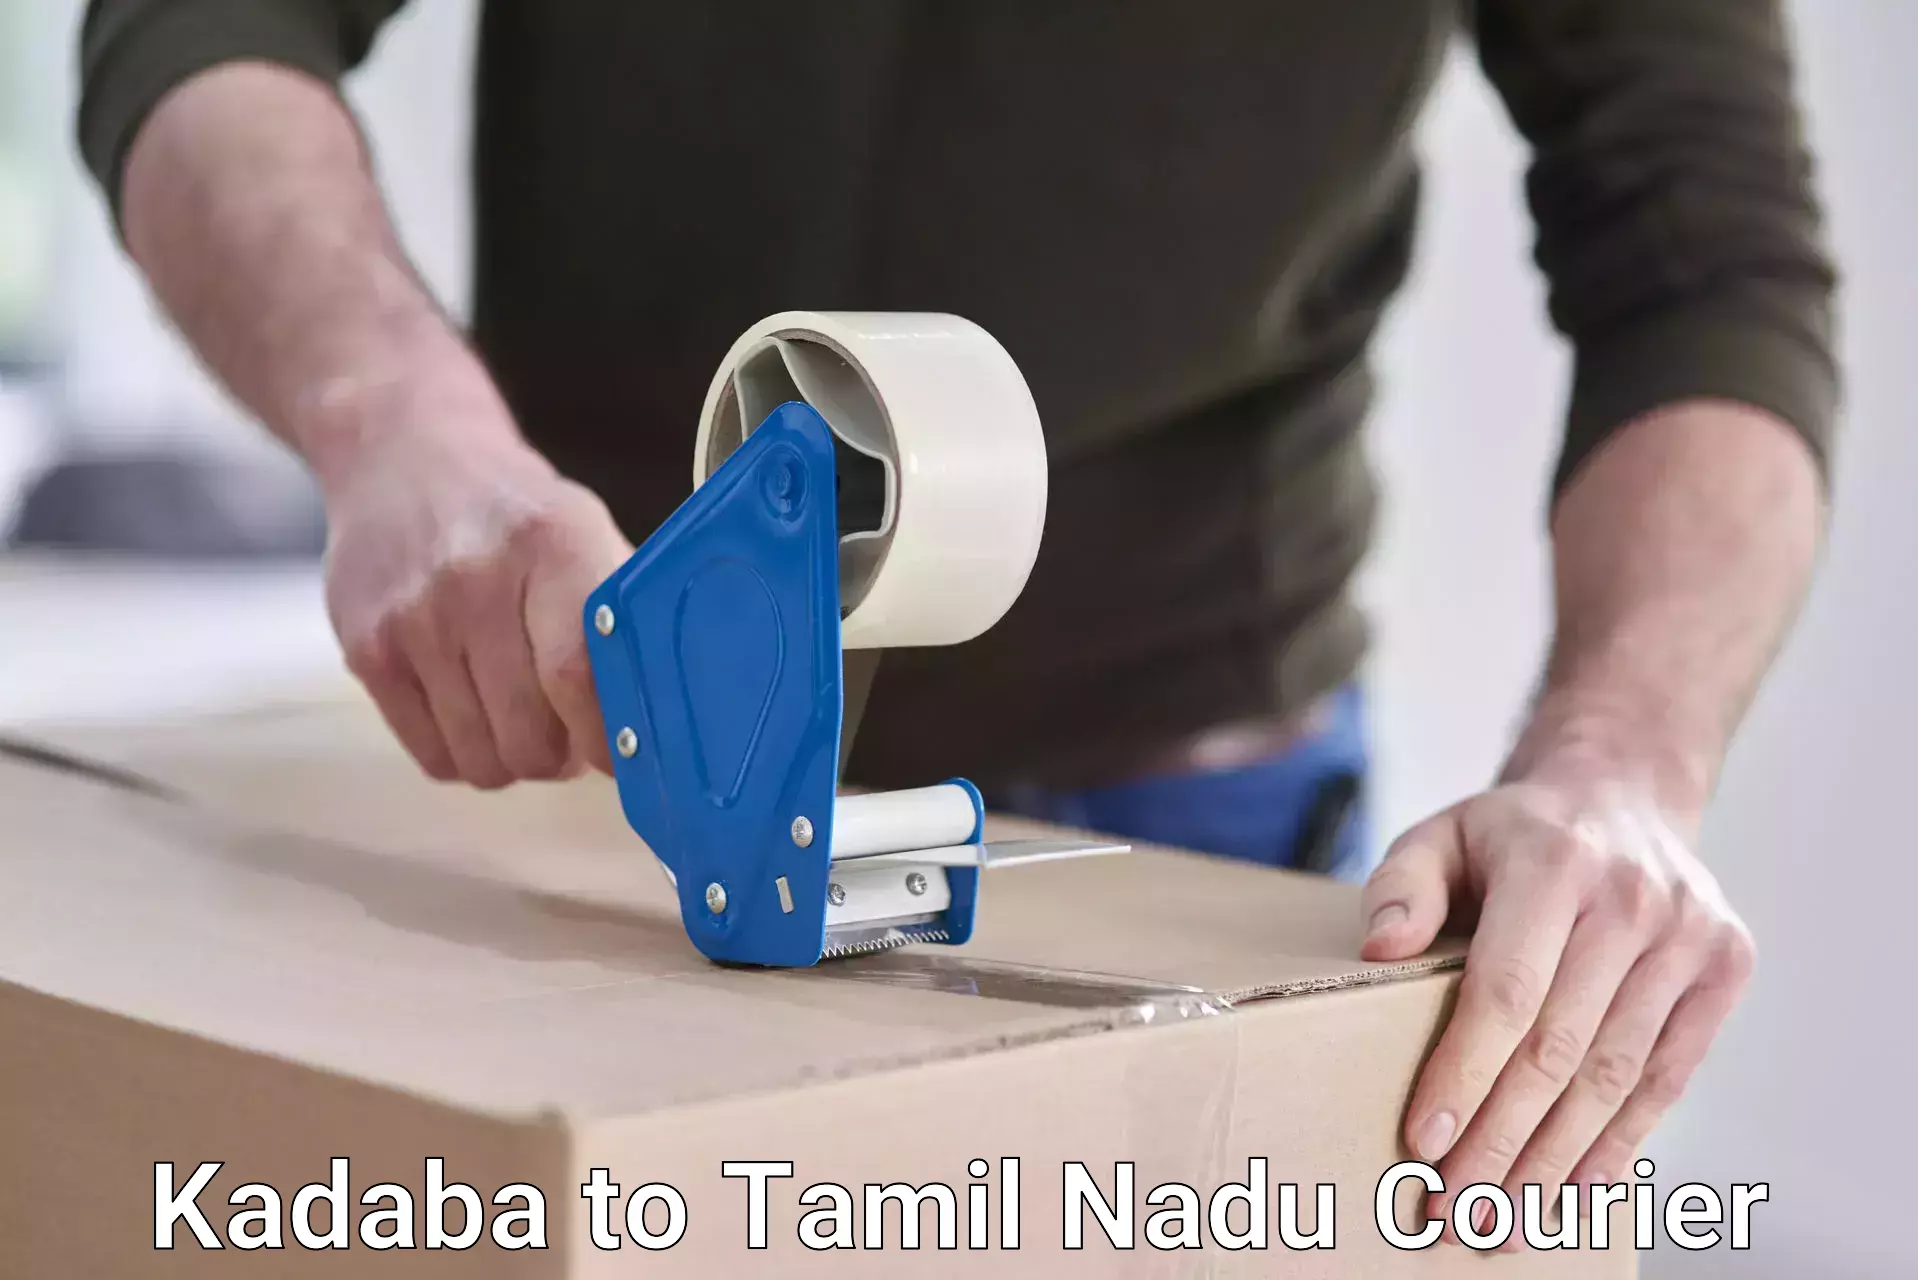 State-of-the-art courier technology Kadaba to Tamil Nadu